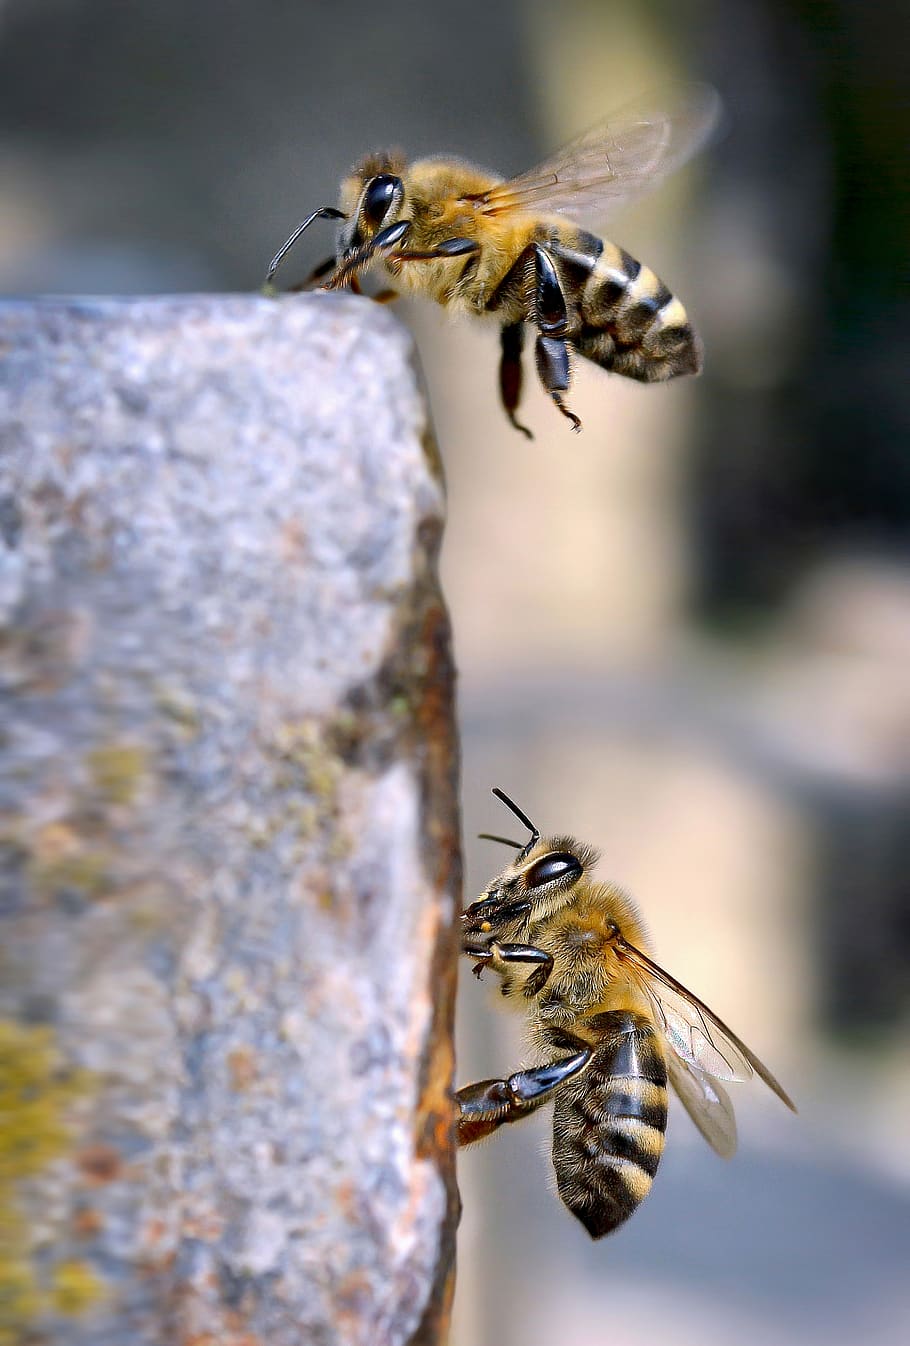 bees, insects, flying, macro, close up, outdoors, nature, honey, animal themes, animal